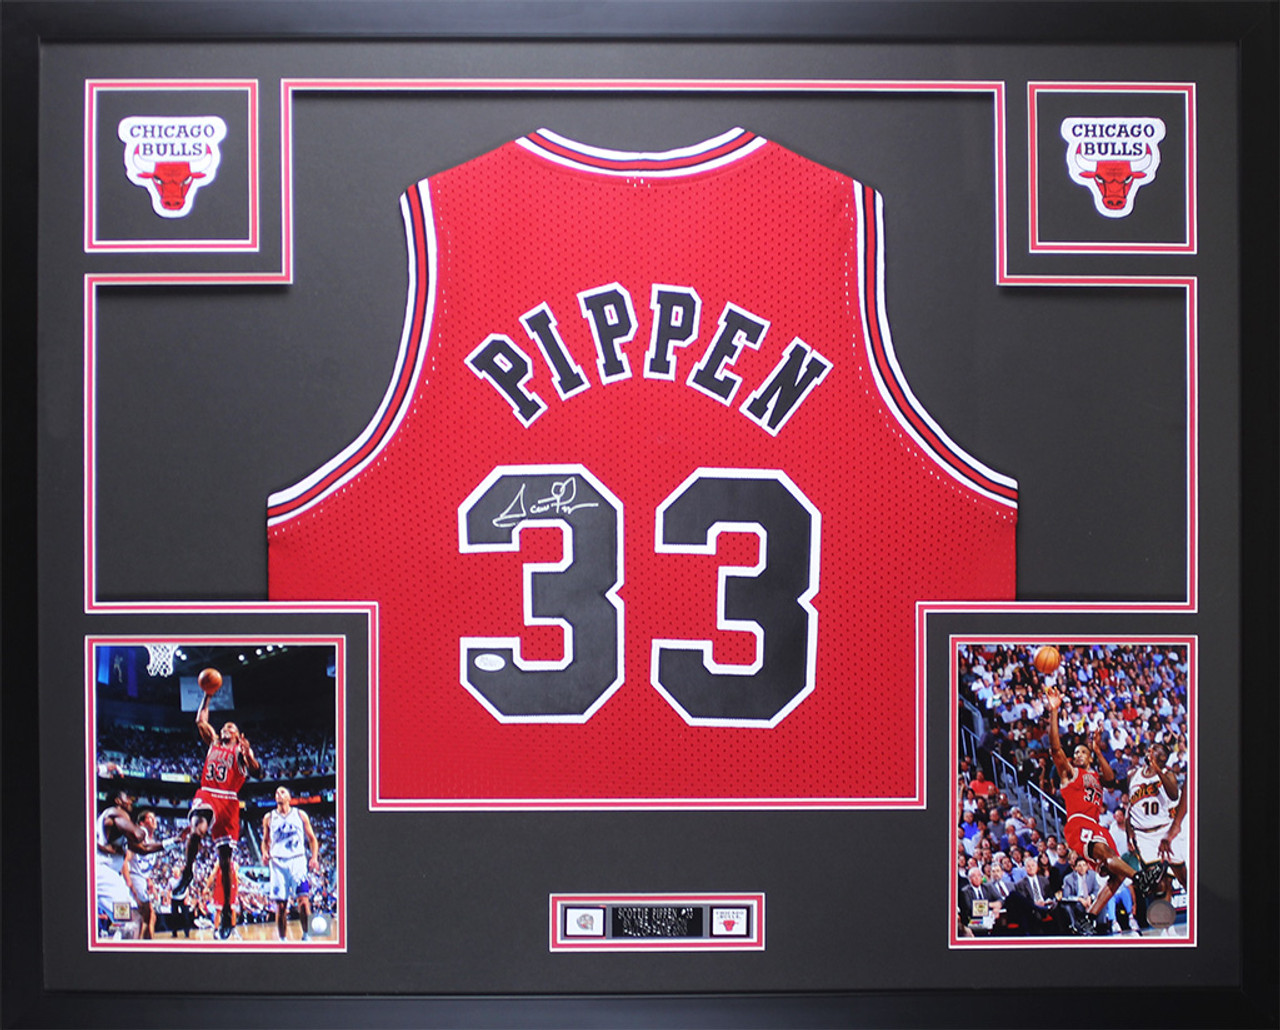 Scottie Pippen Autographed Signed Framed Chicago Bulls Jersey 